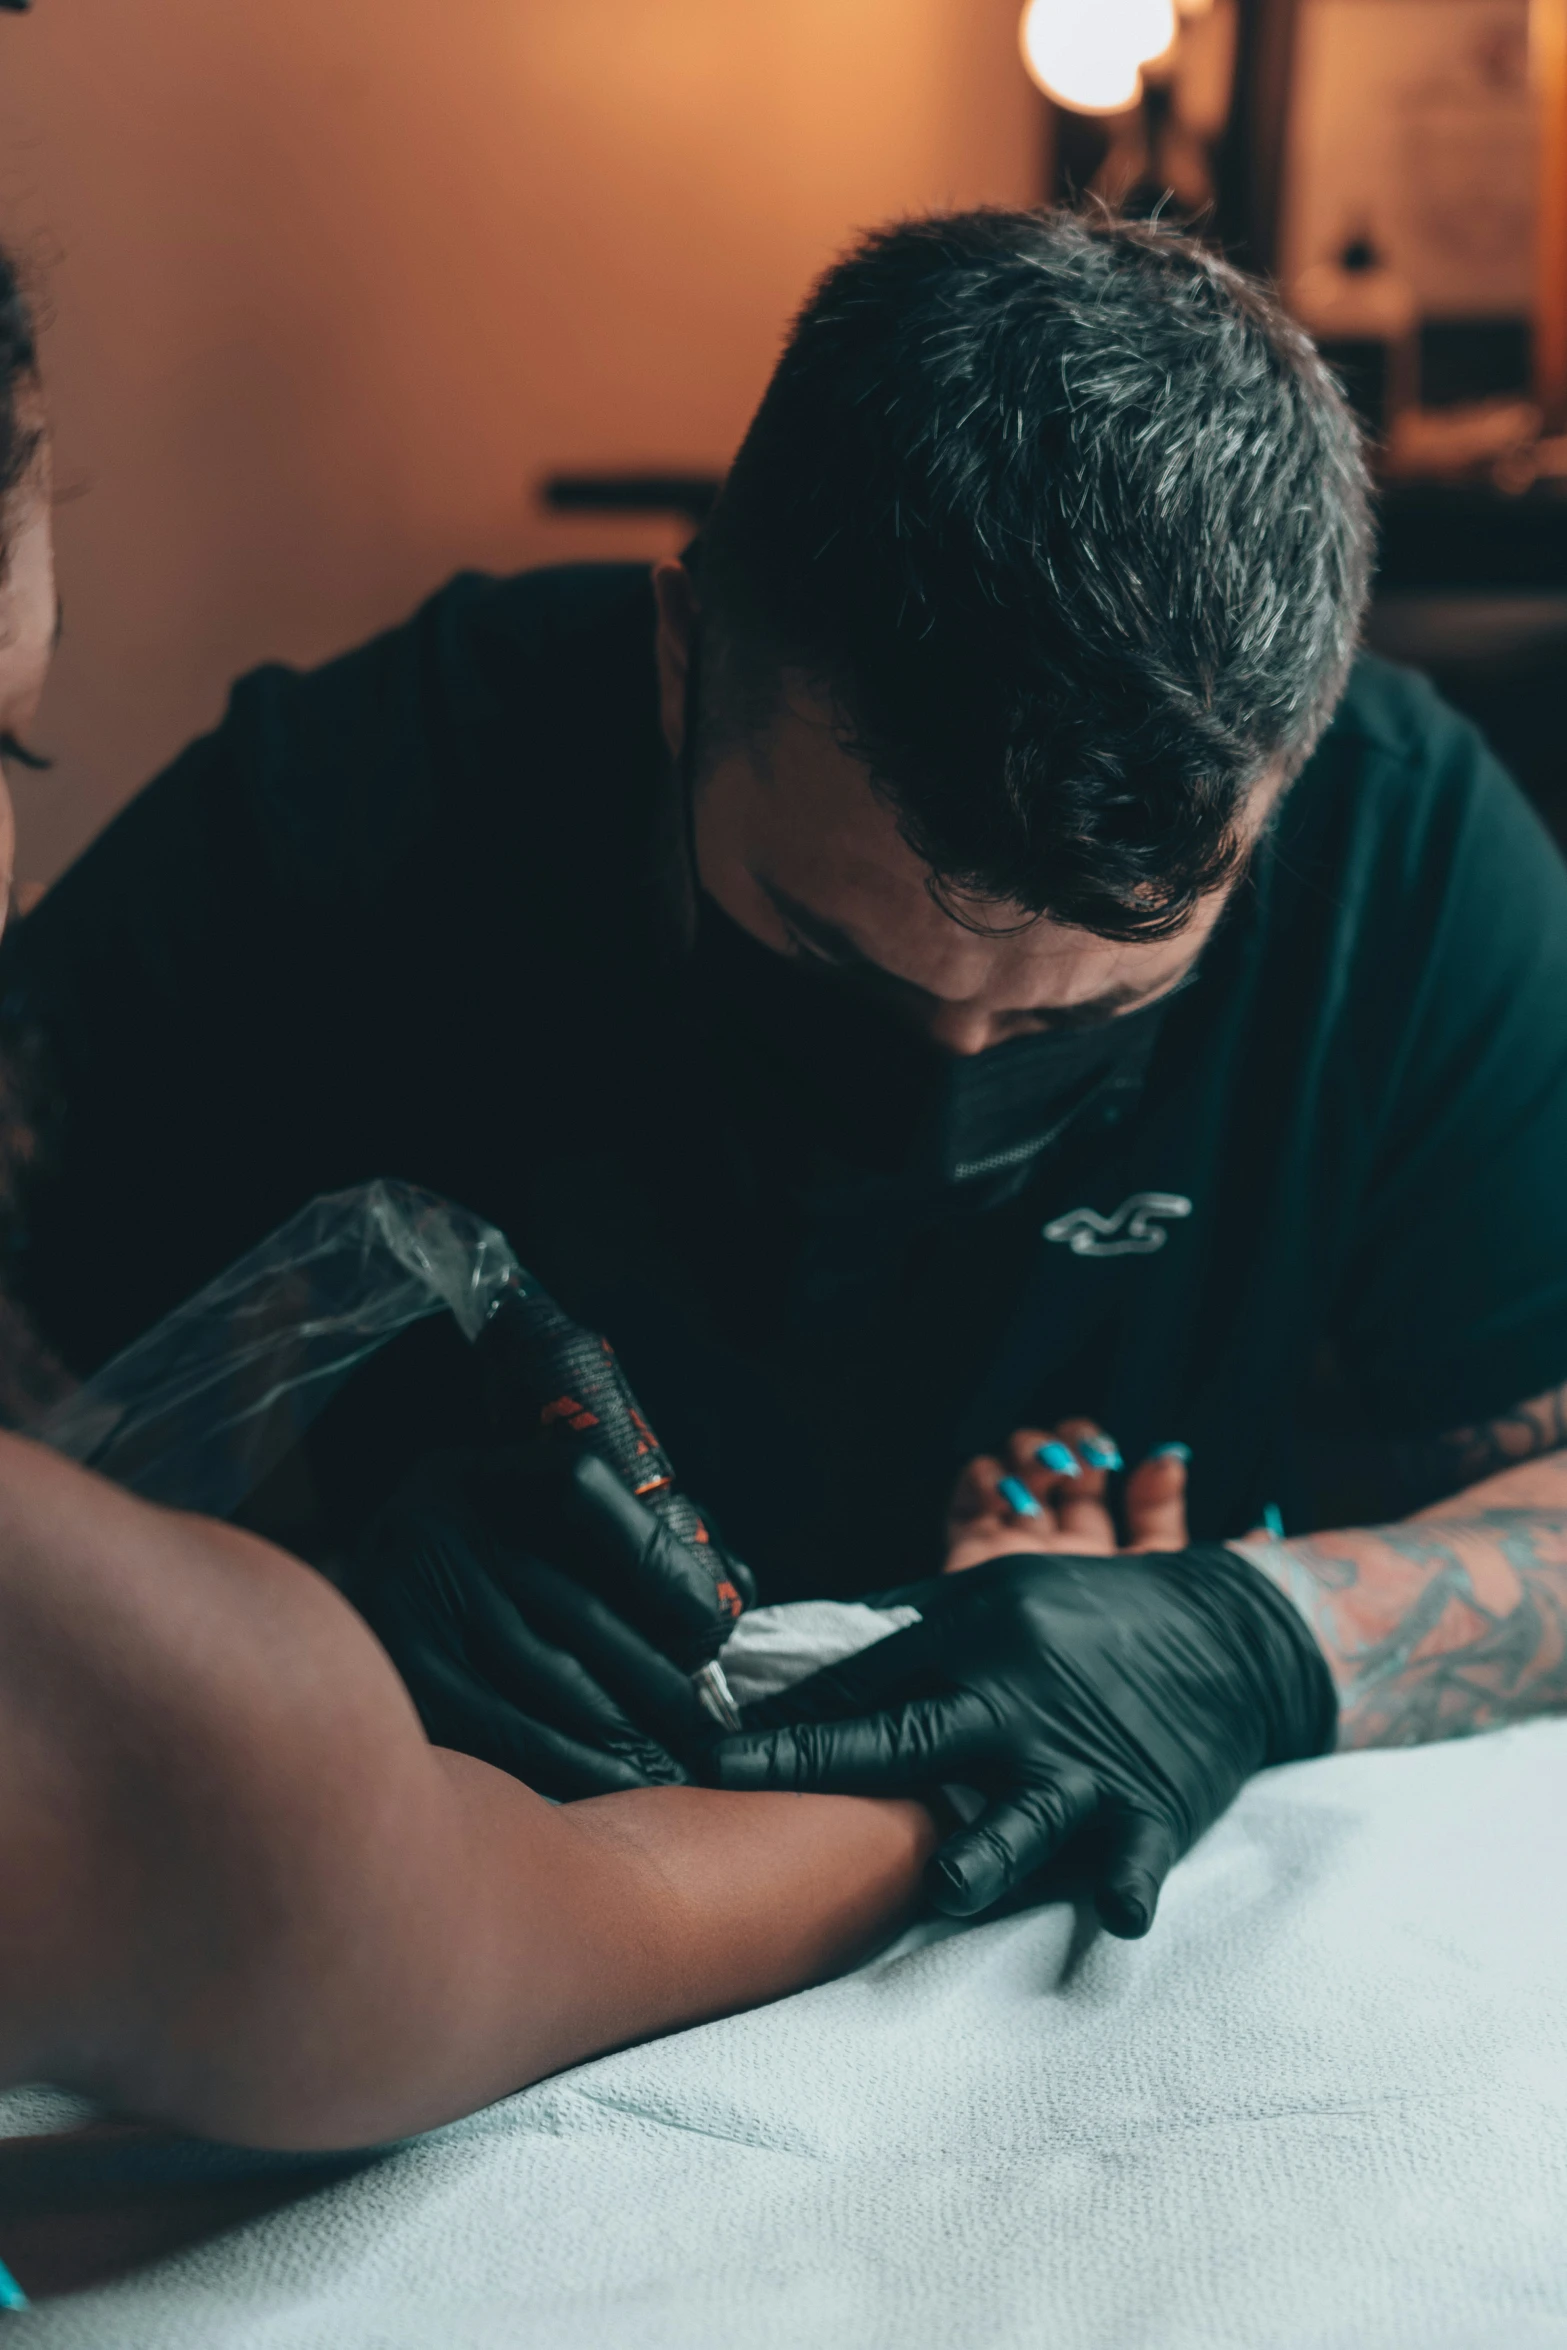 a man is getting his tattoos done by another person